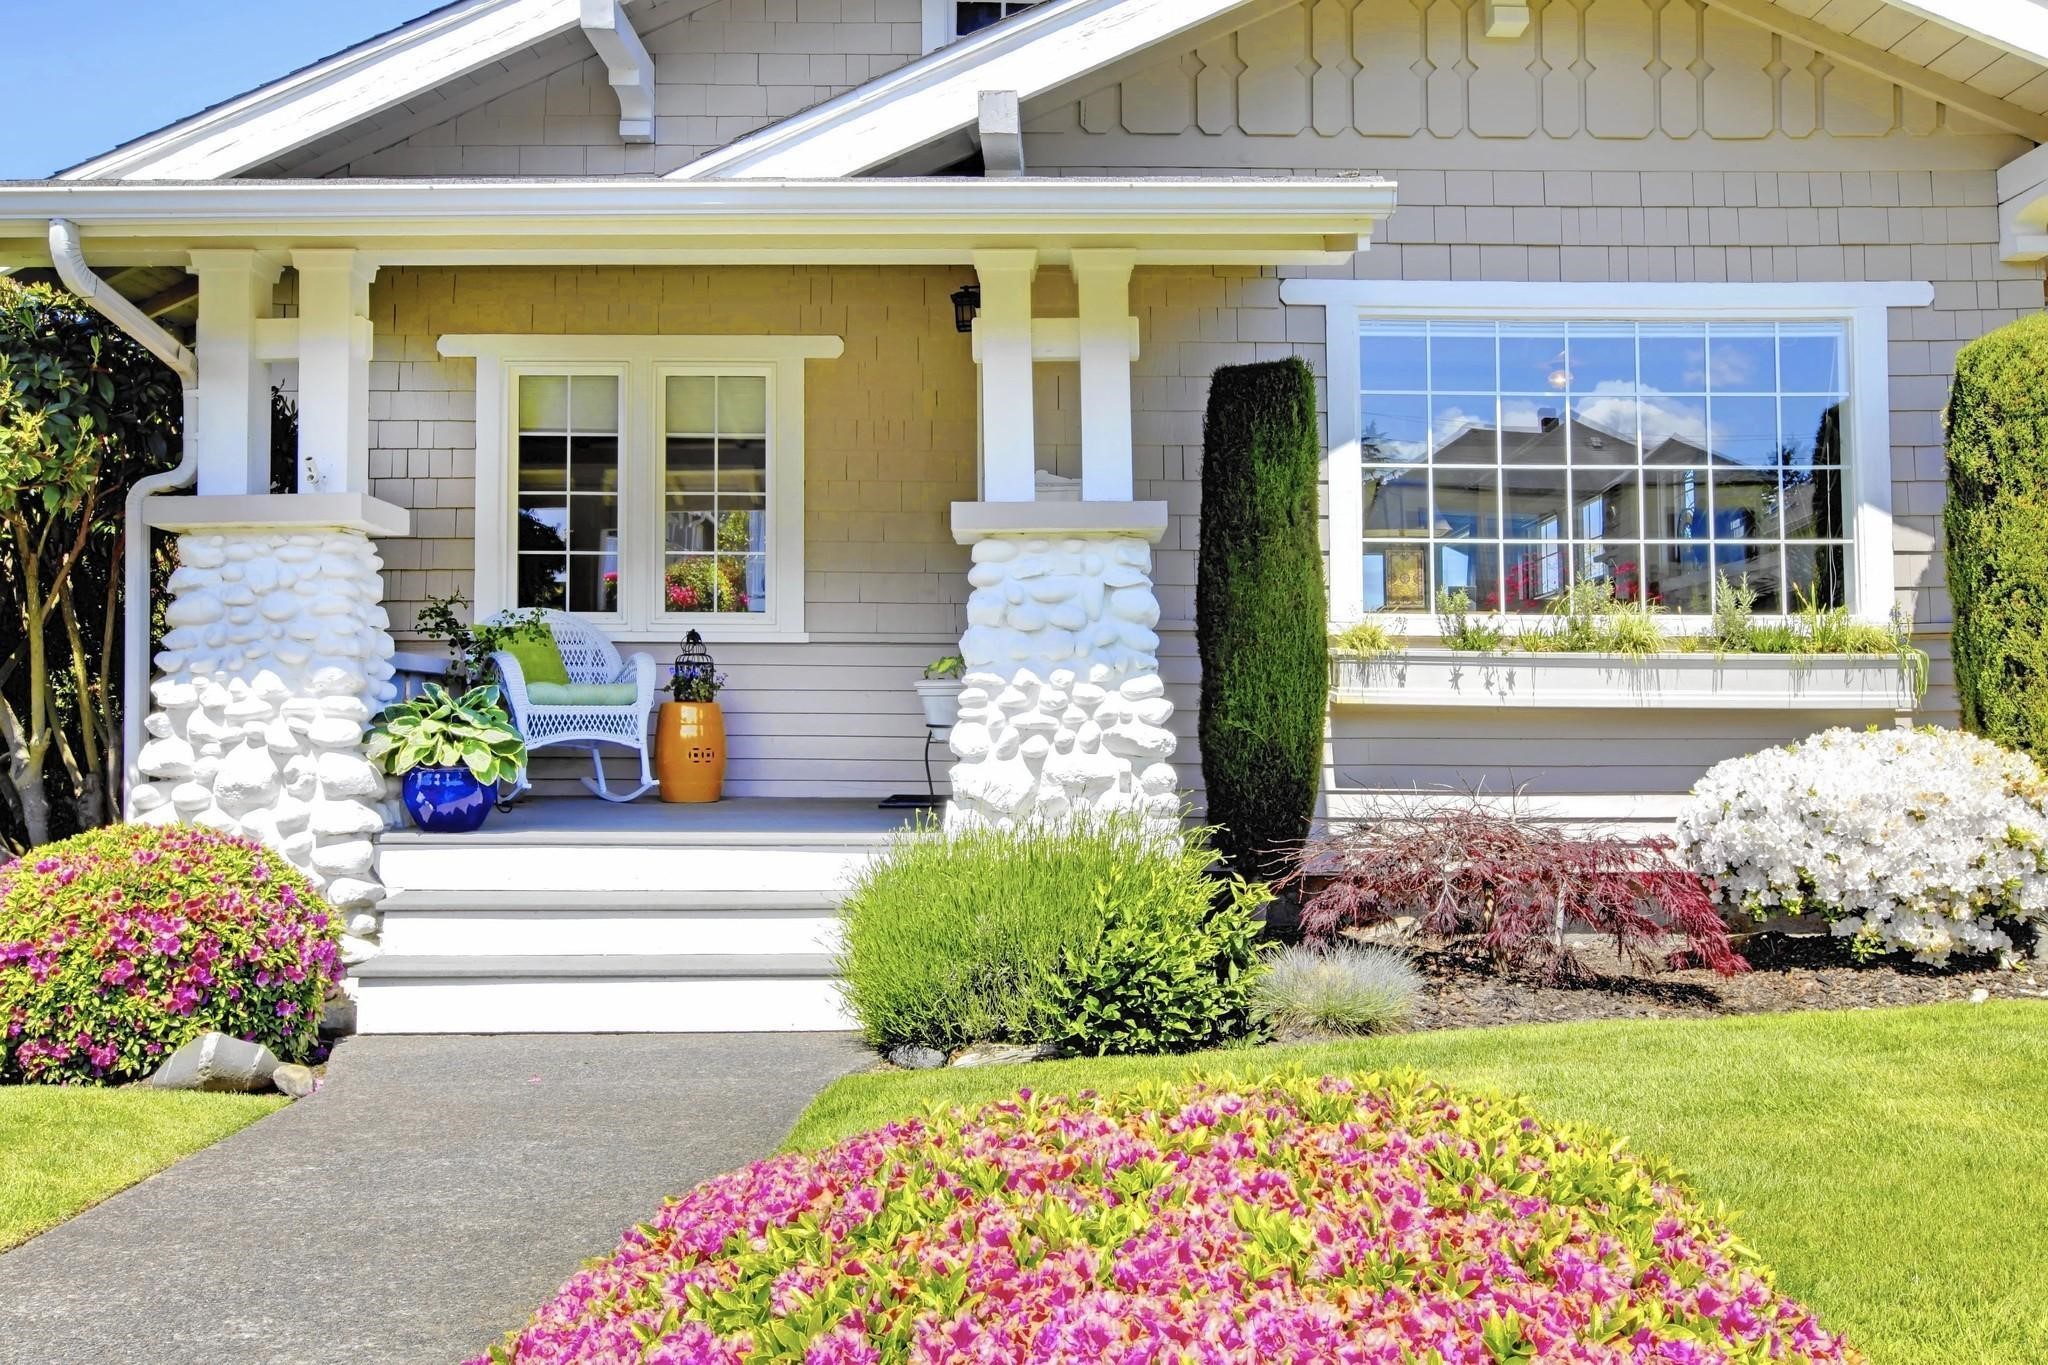 Curb Appeal to Your Property